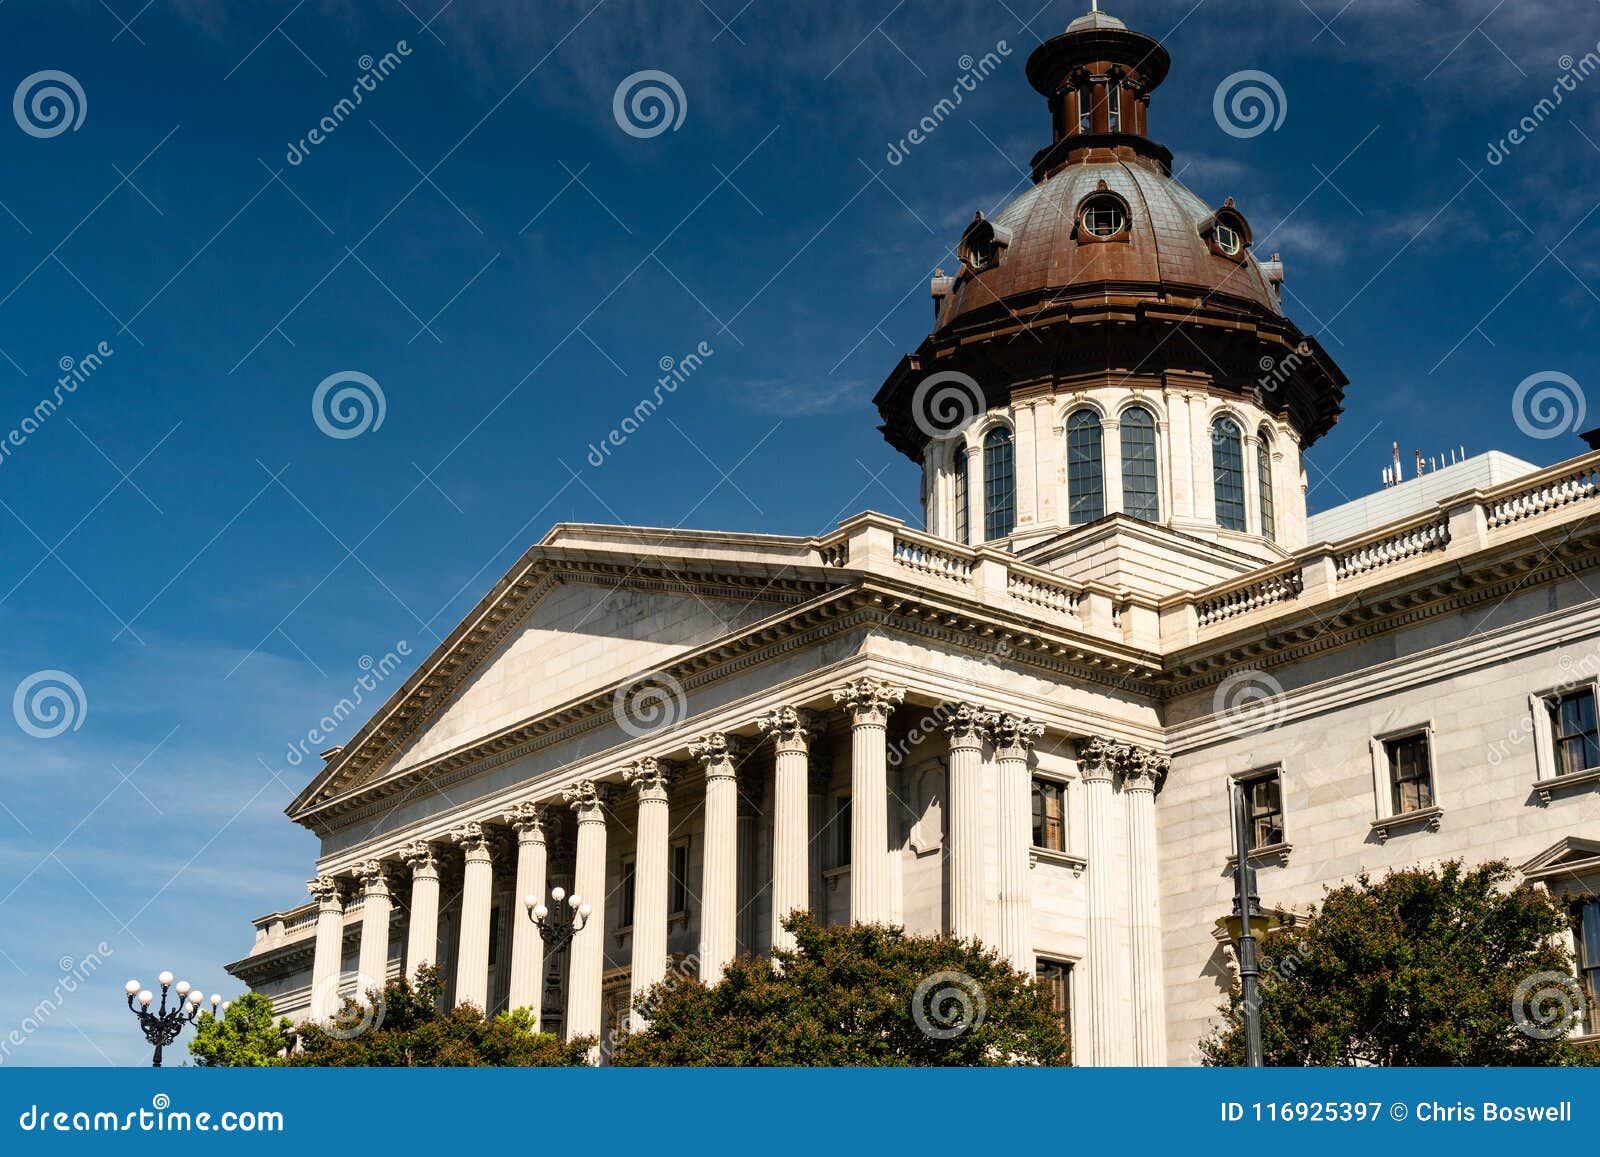 steps and columns of the south carolina statehouse in columbia